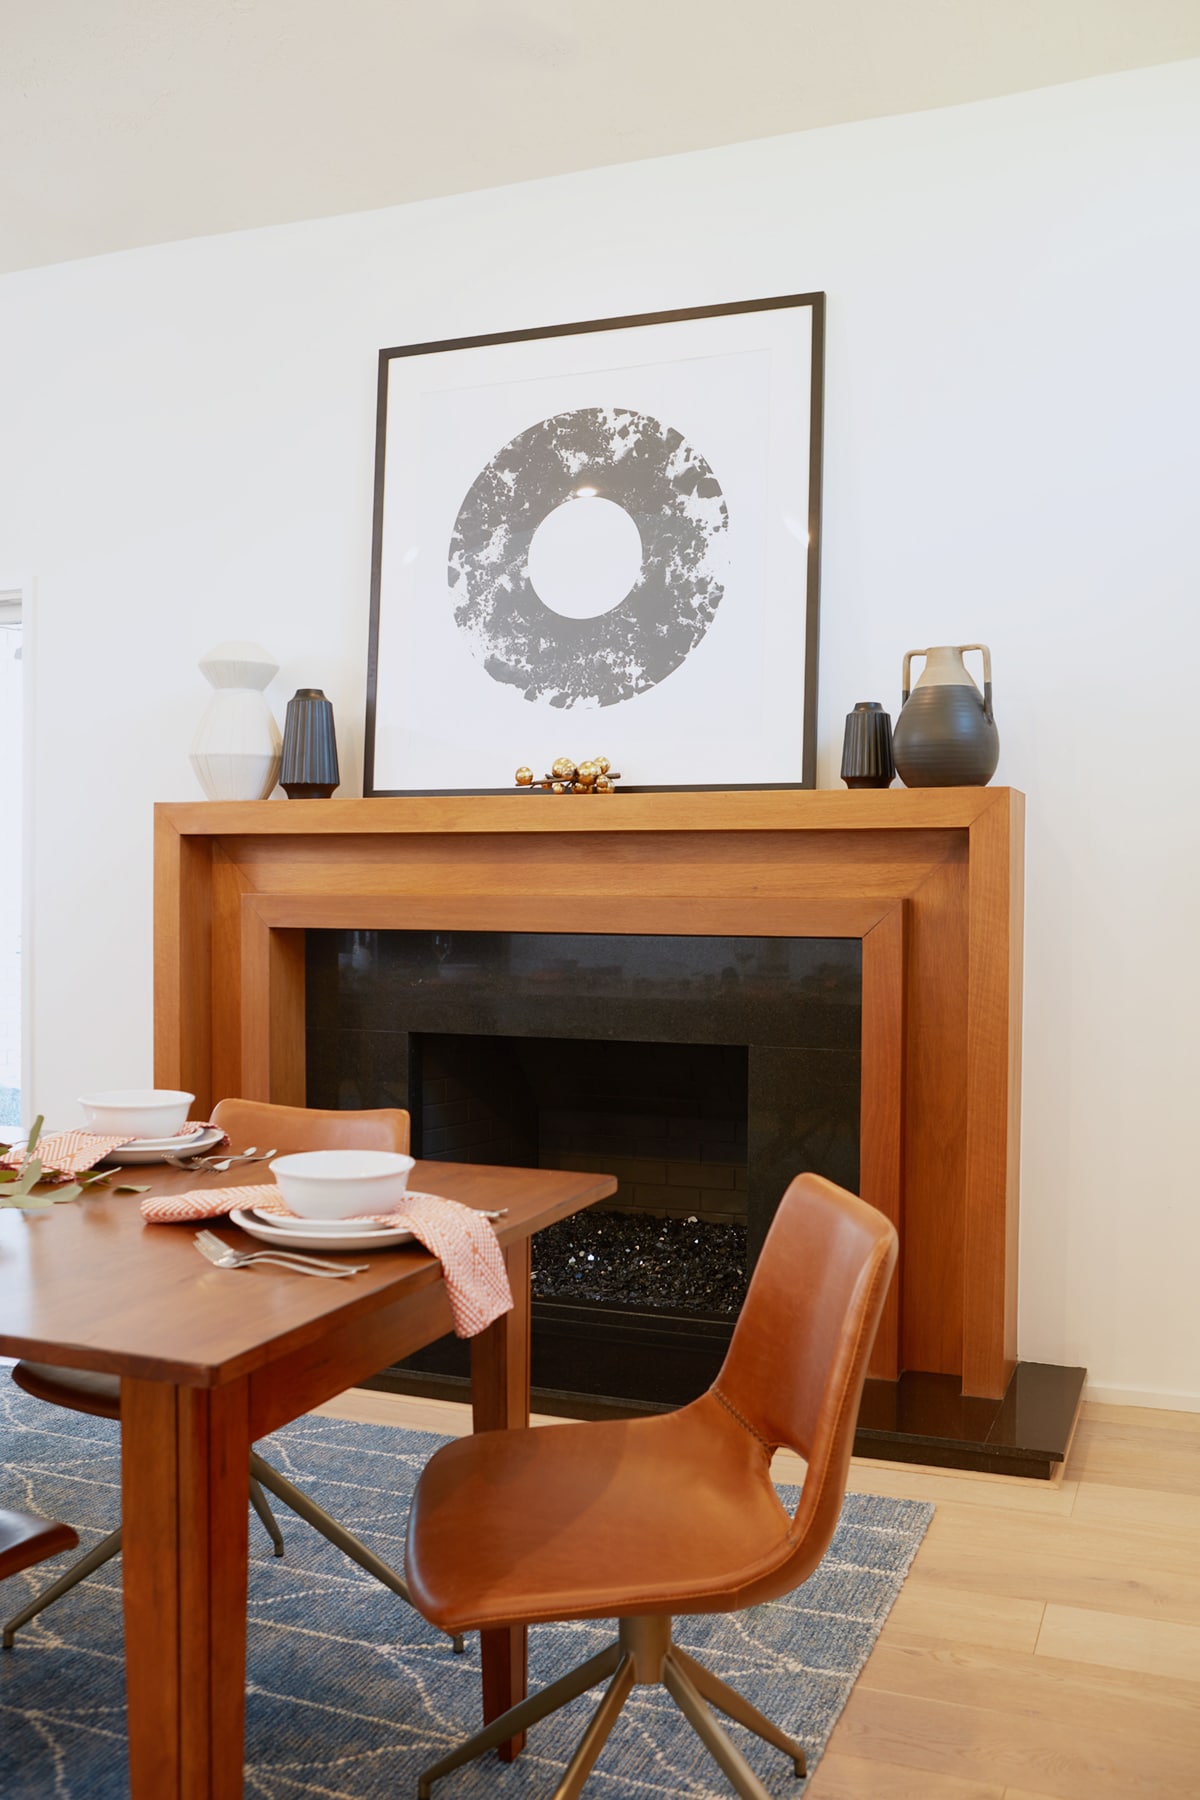 Overstock House Tour - Kirsten's Mid-Century Modern Dining Room | coco kelley